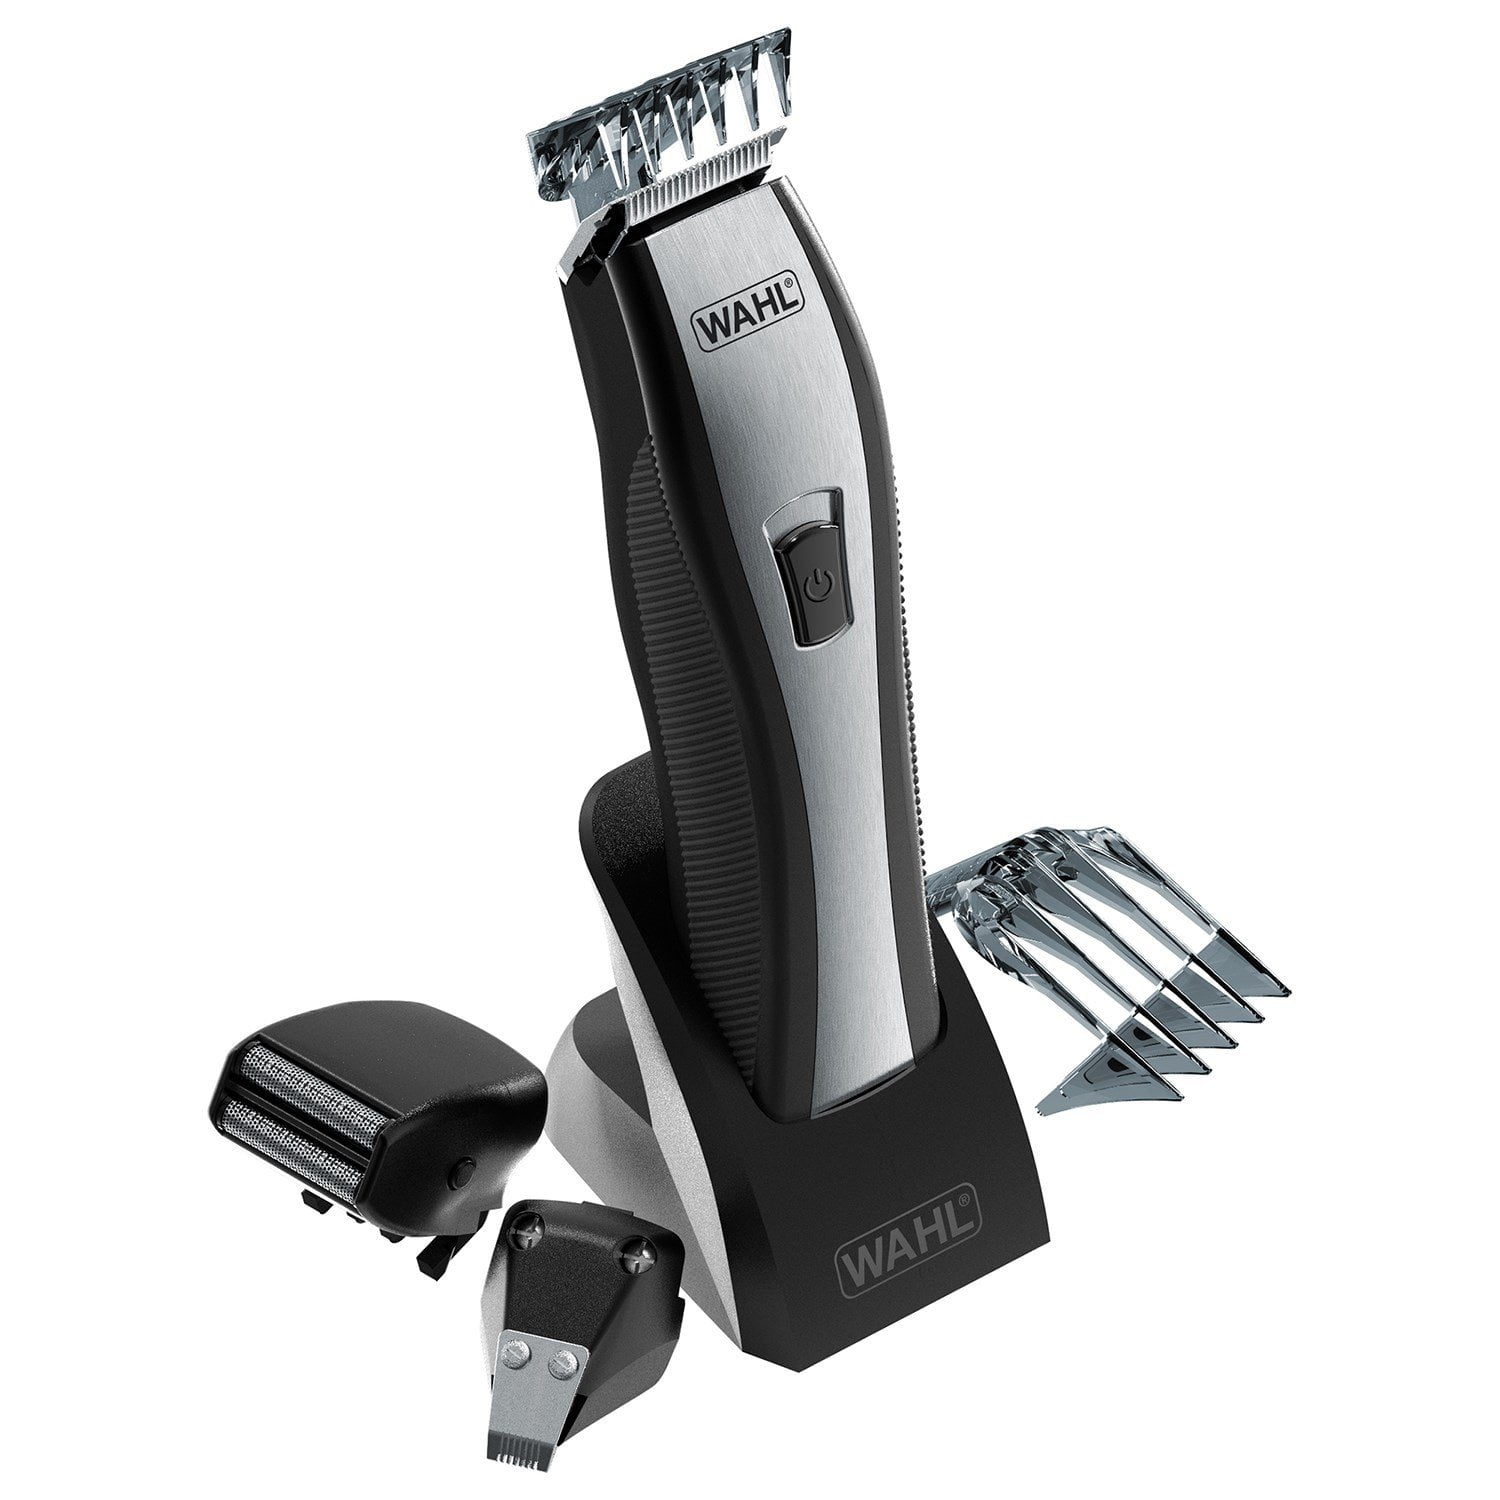 wahl all in one trimmer walmart